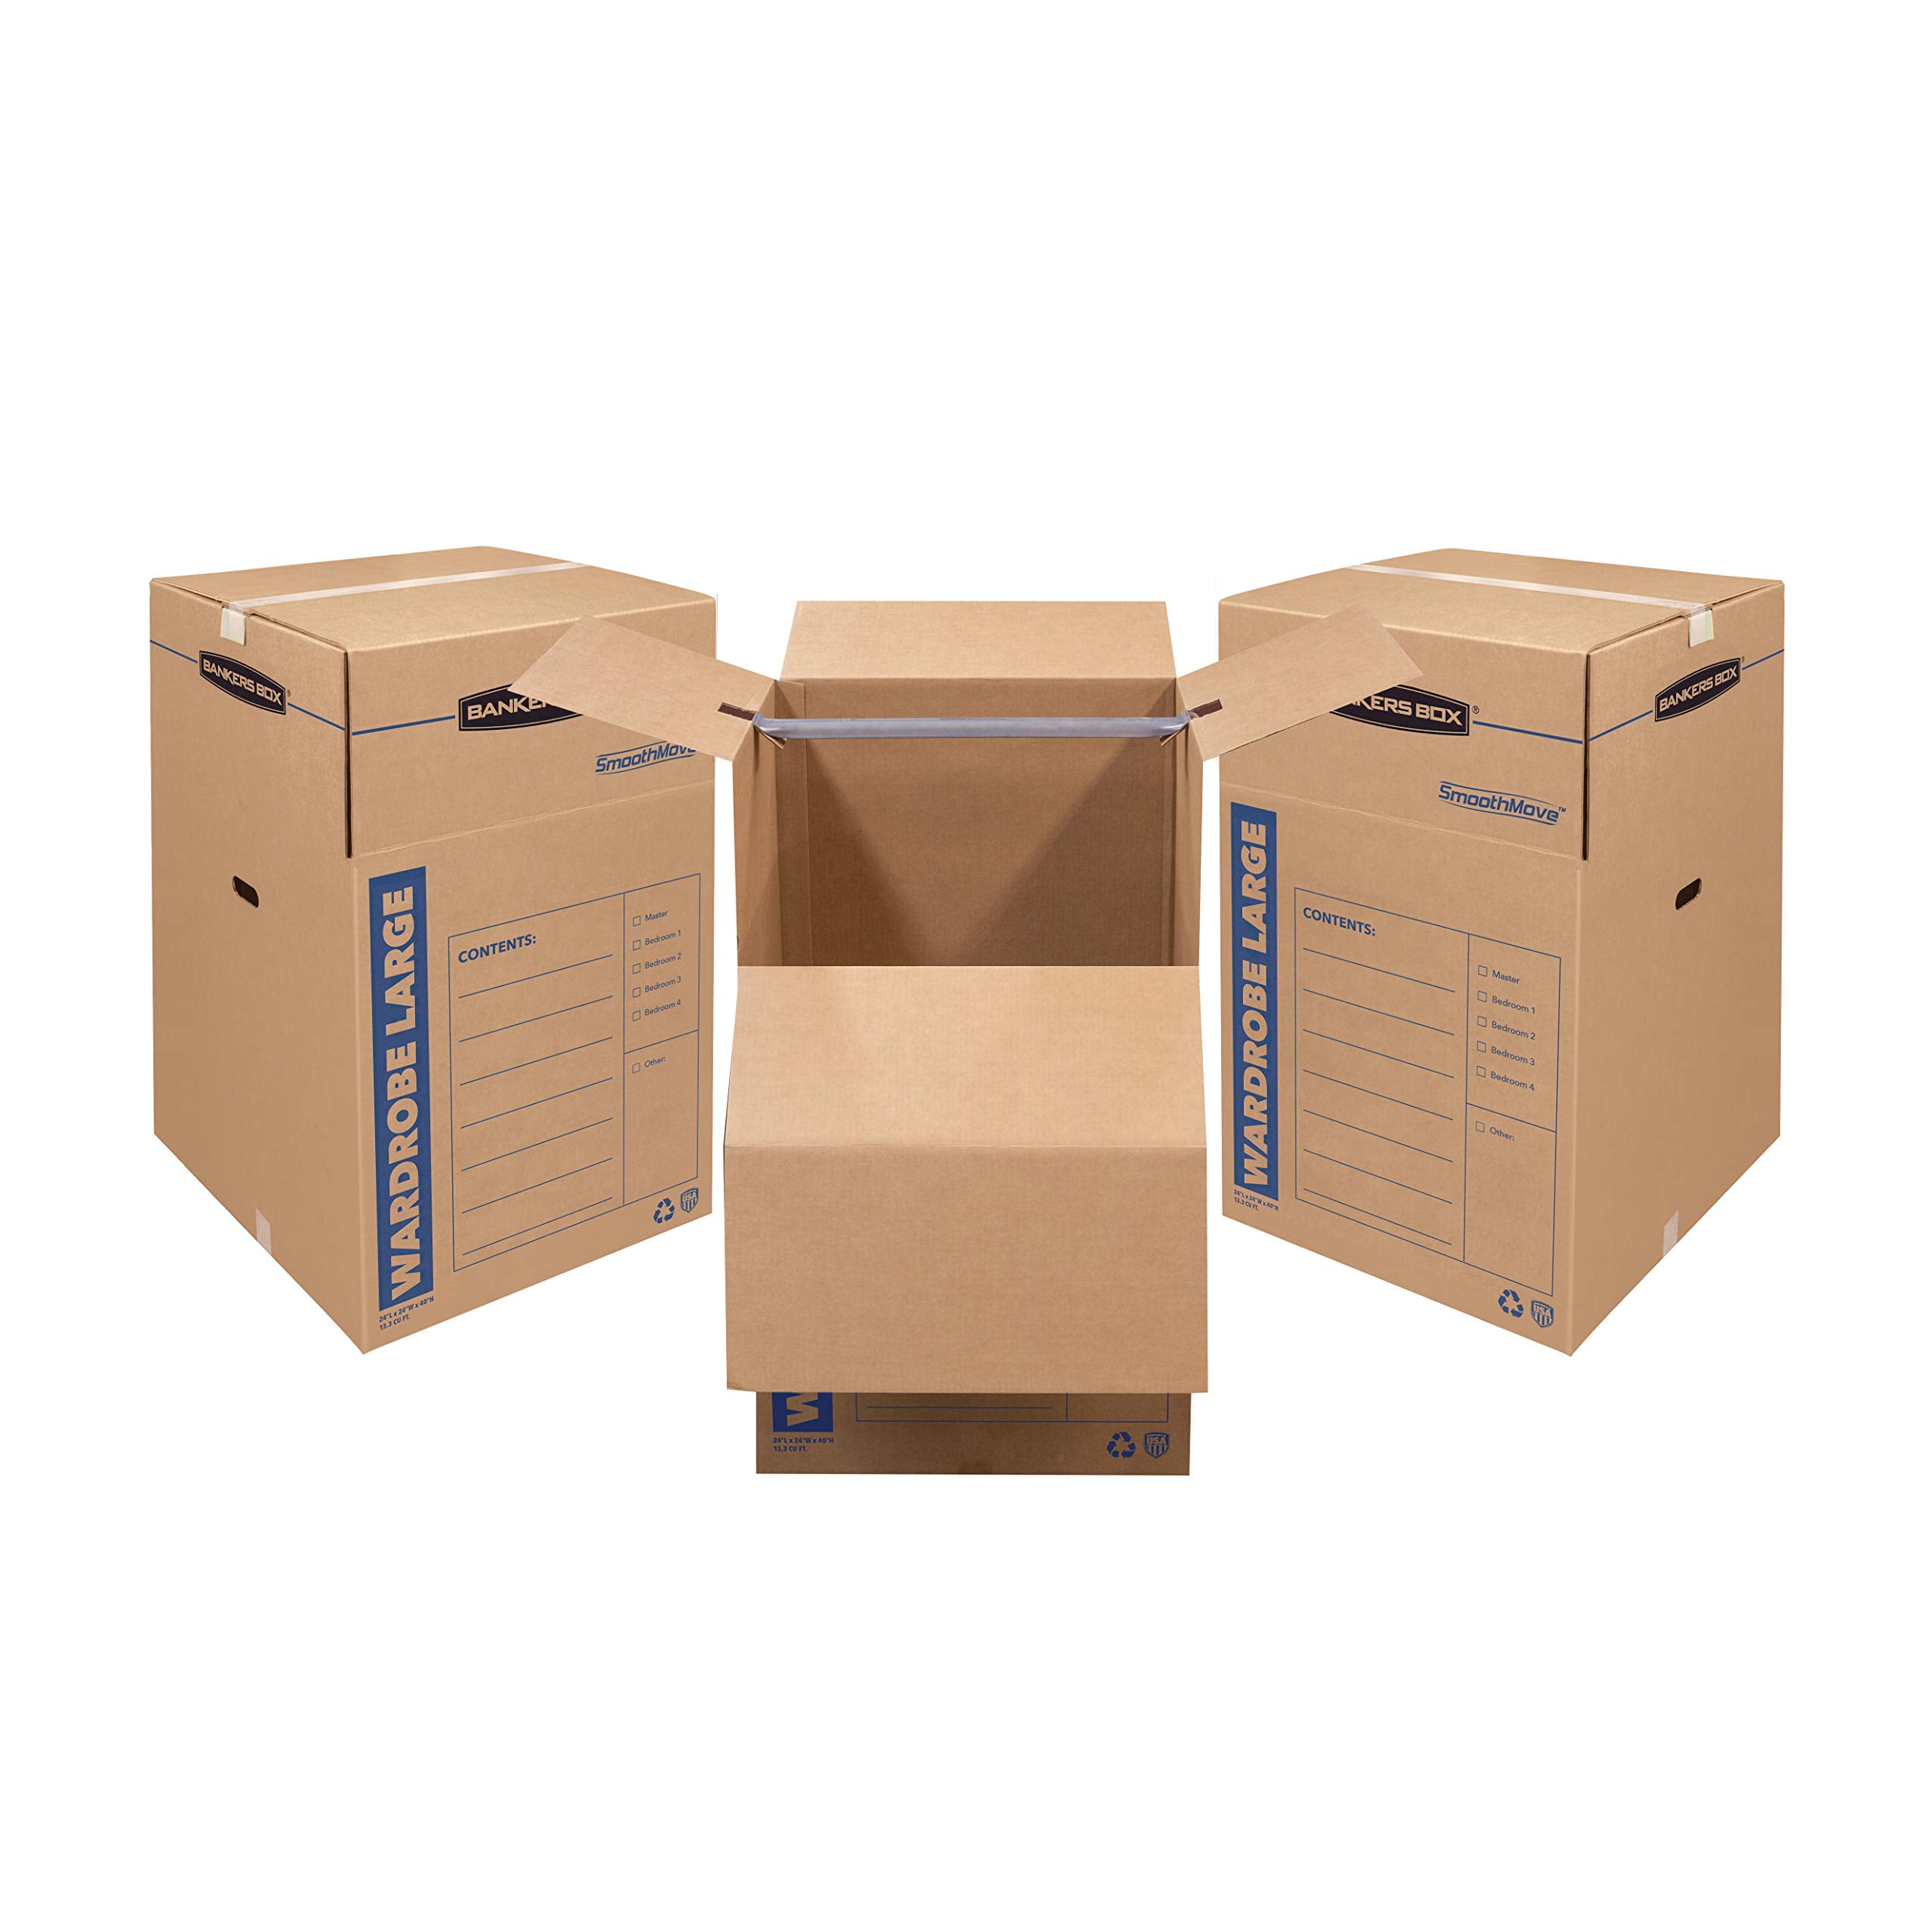 Tall Wardrobe Moving Boxes 24 x 24 x 40 Inches 7711001 3 Pack